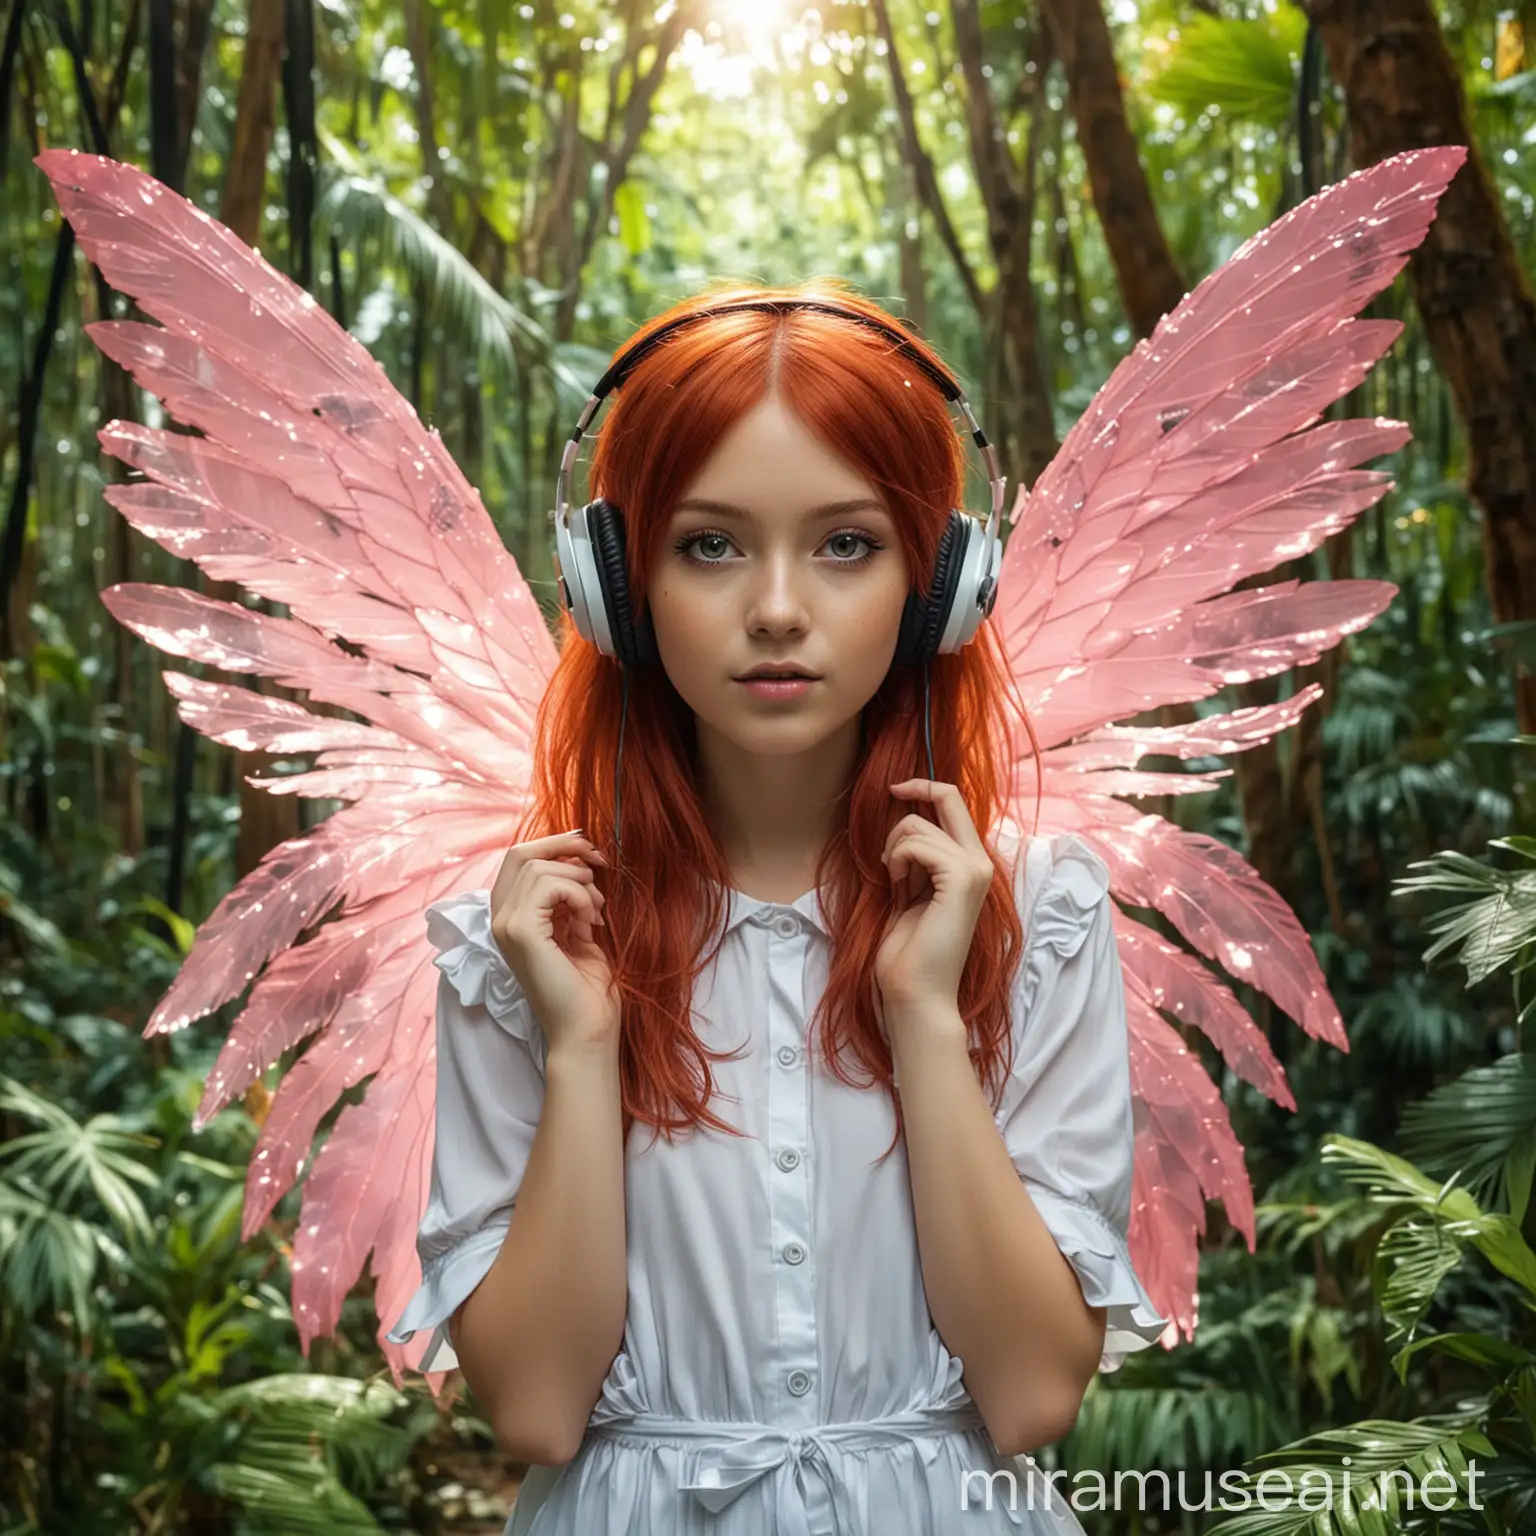 Modern Fairy Girl with Red Hair and Headphones in Tropical Forest